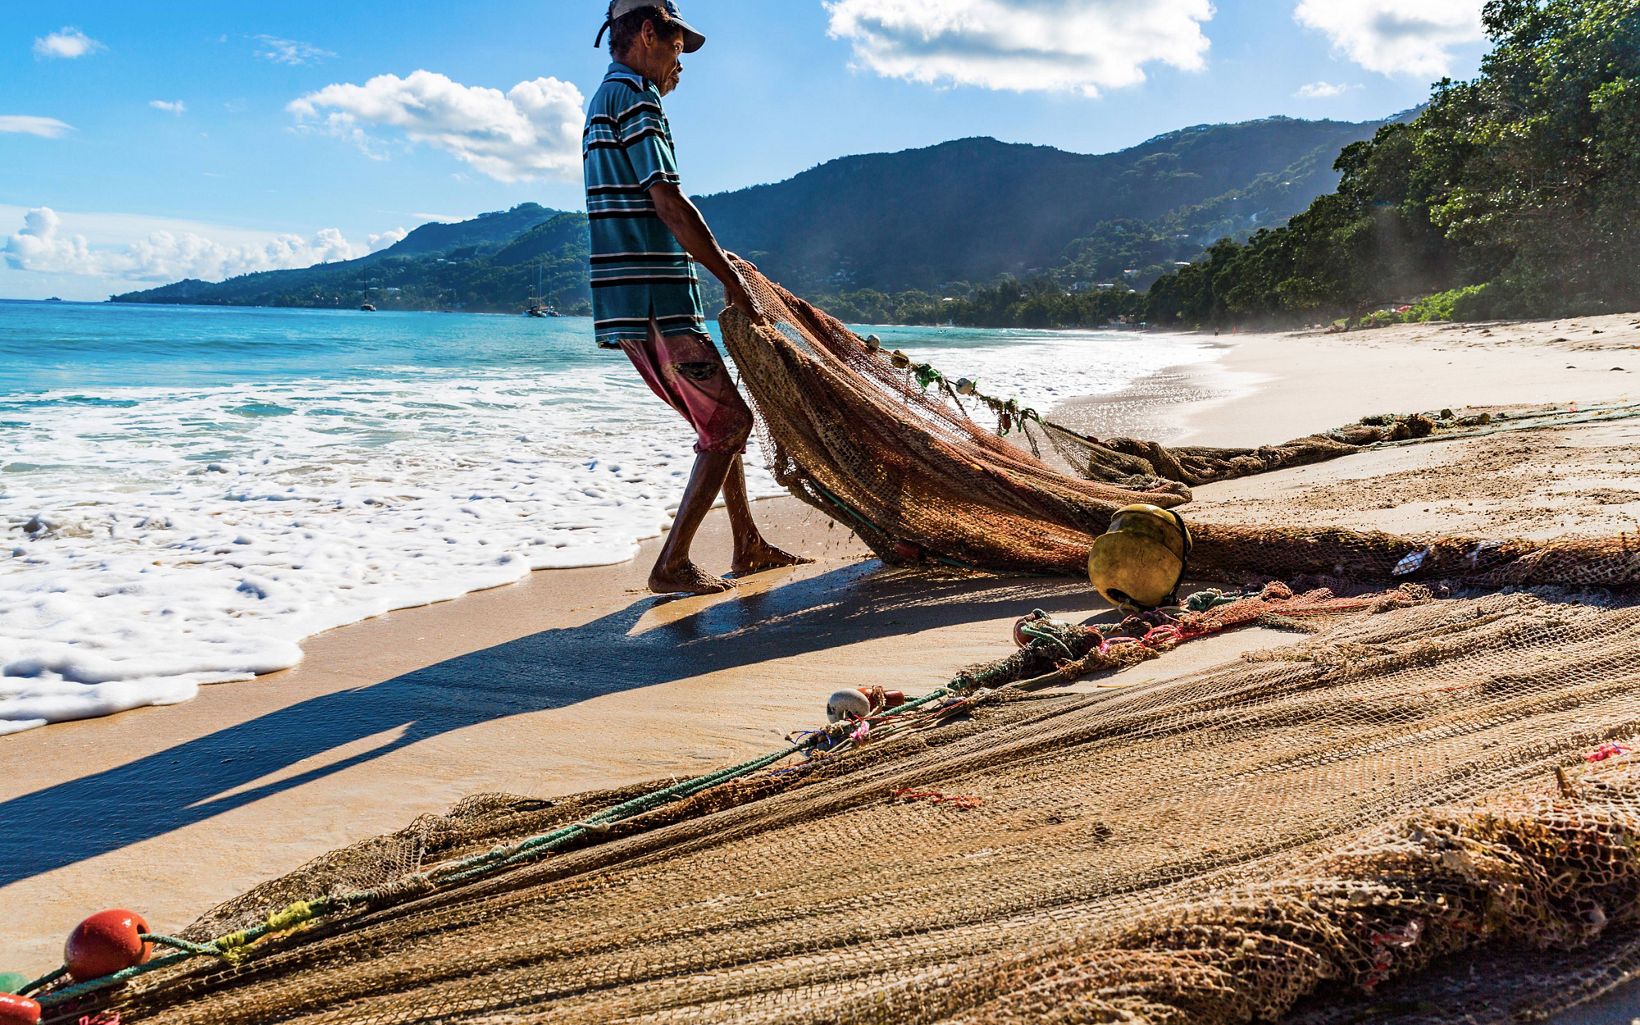 Seychelles After using the Blue Bonds model to refinance a portion of its debt, Seychelles designated 30 percent of its ocean territory as marine protected areas. © Jason Houston for The Nature Conservancy